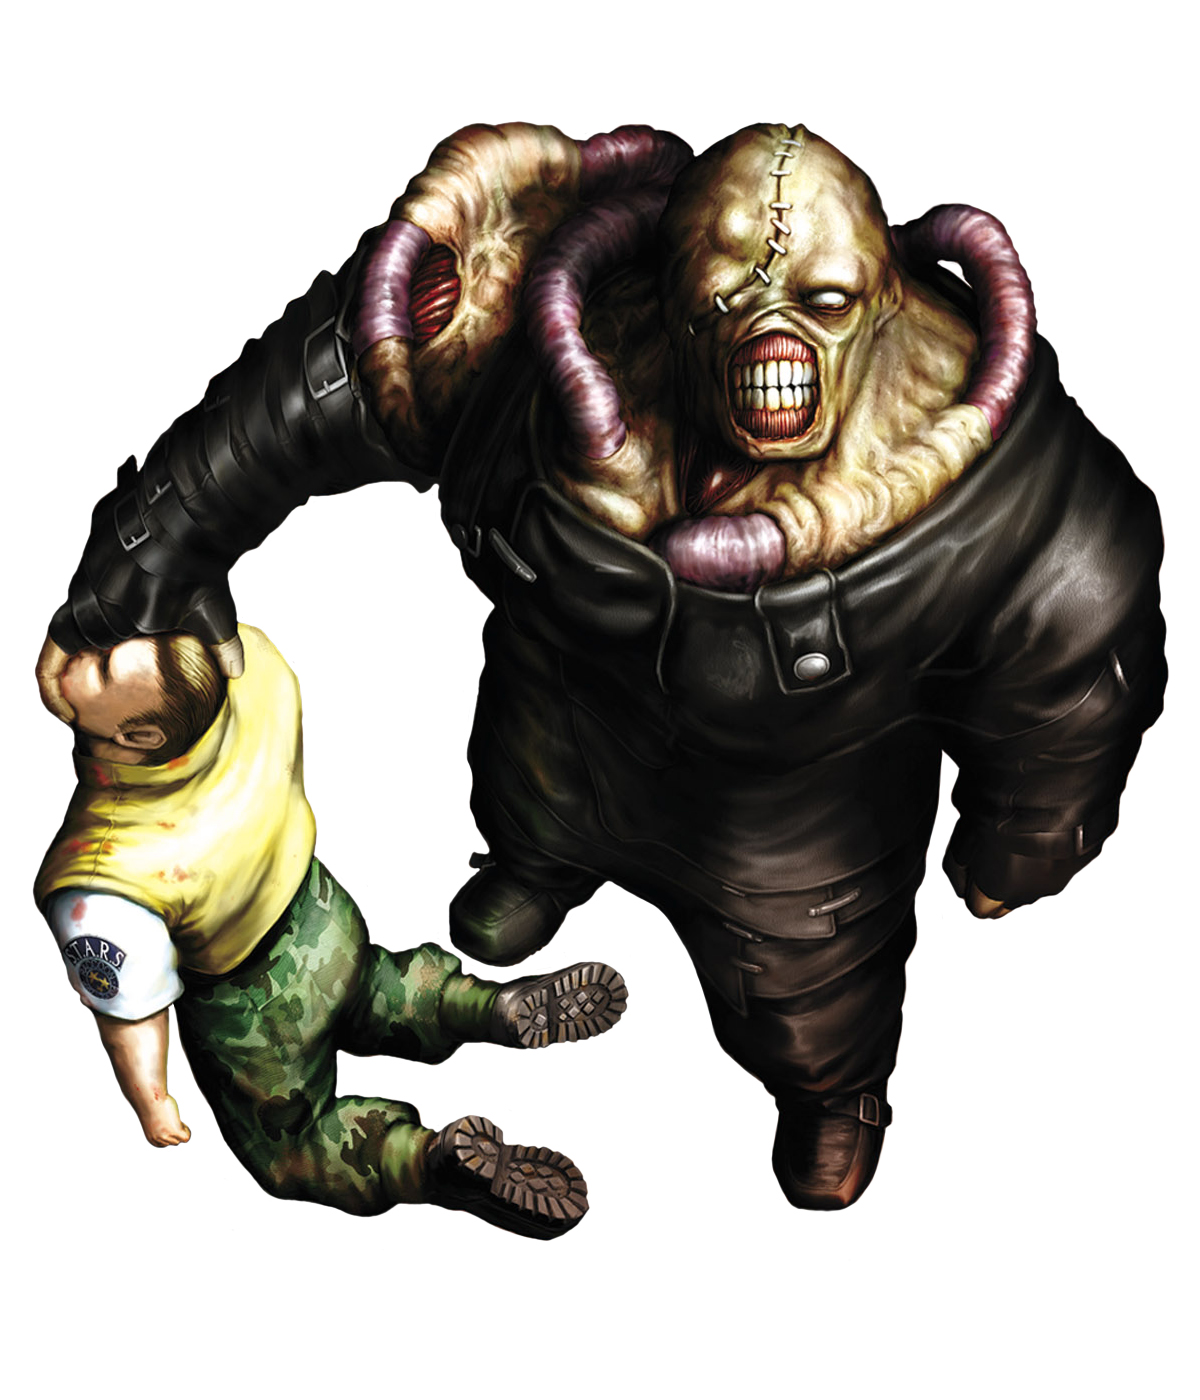 Resident Evil 3 Remake Nemesis characters